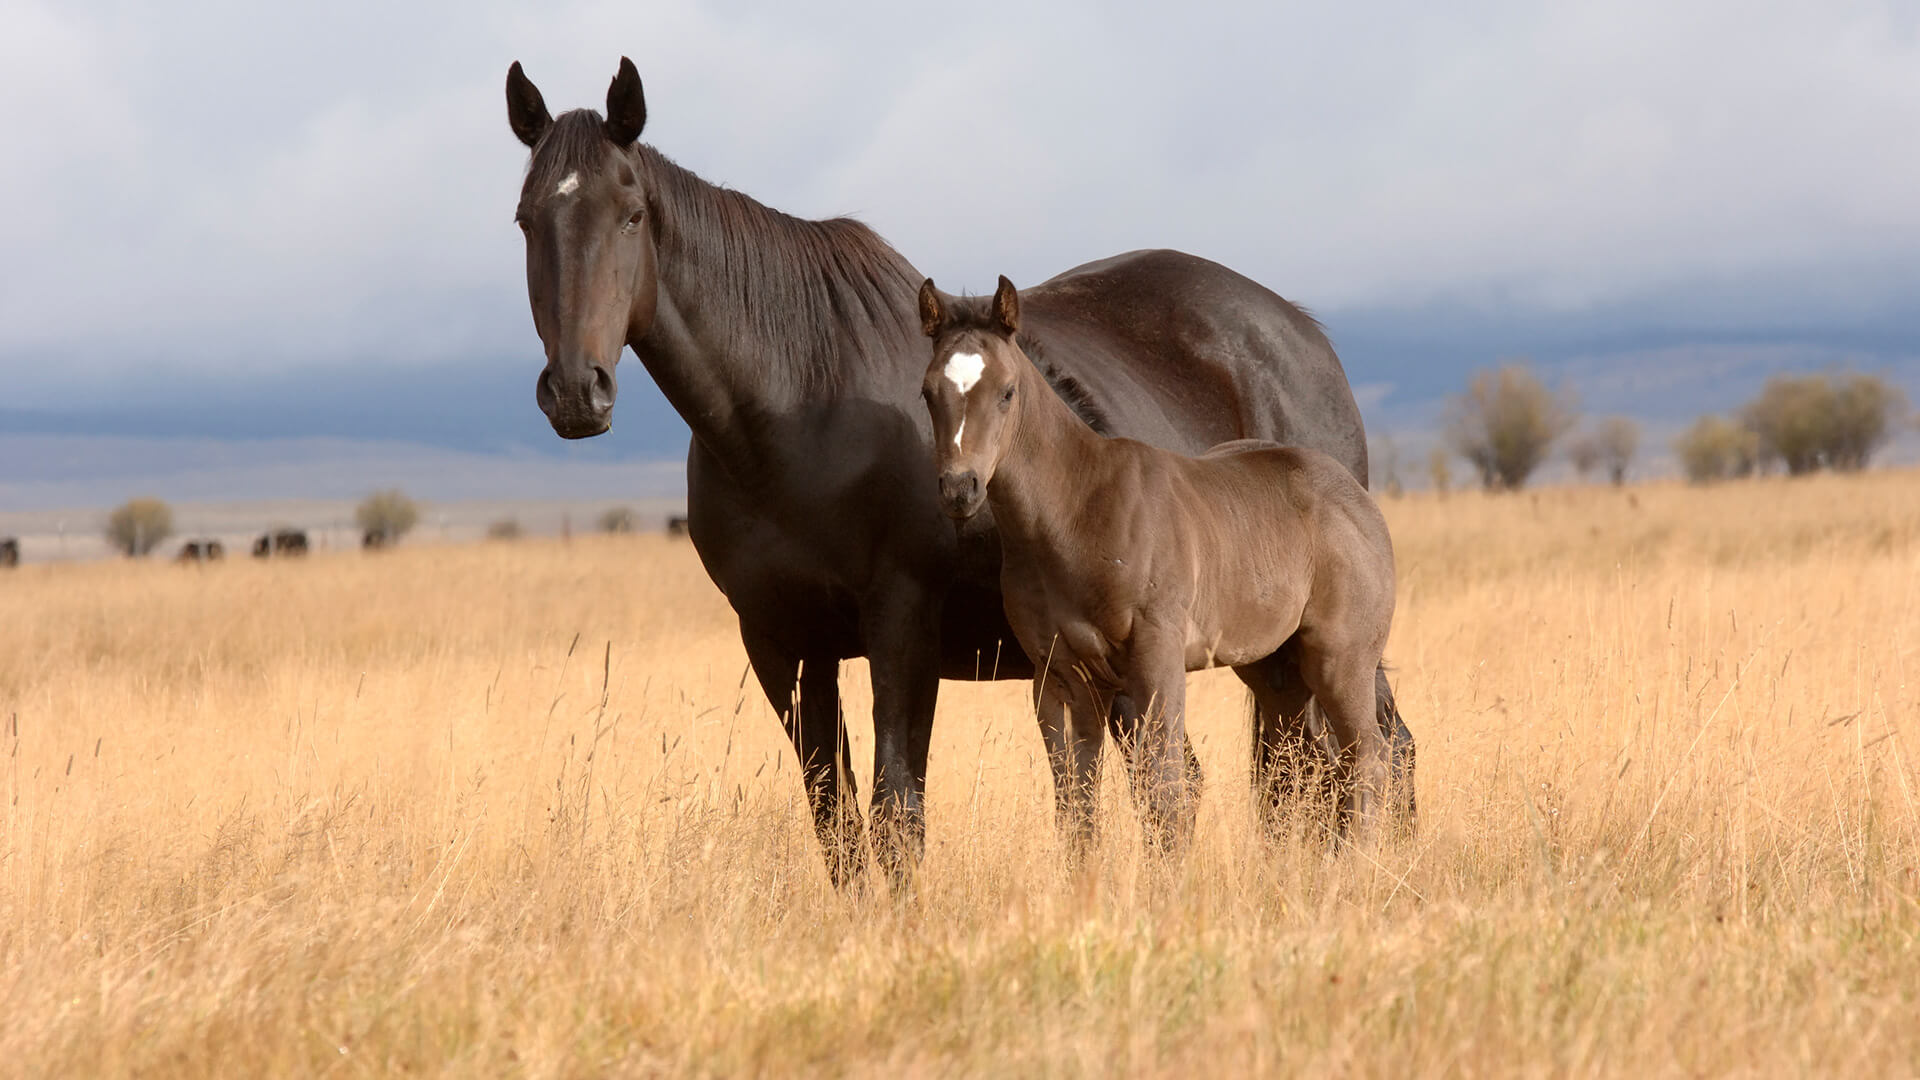 Wild horse standing in field with young horse